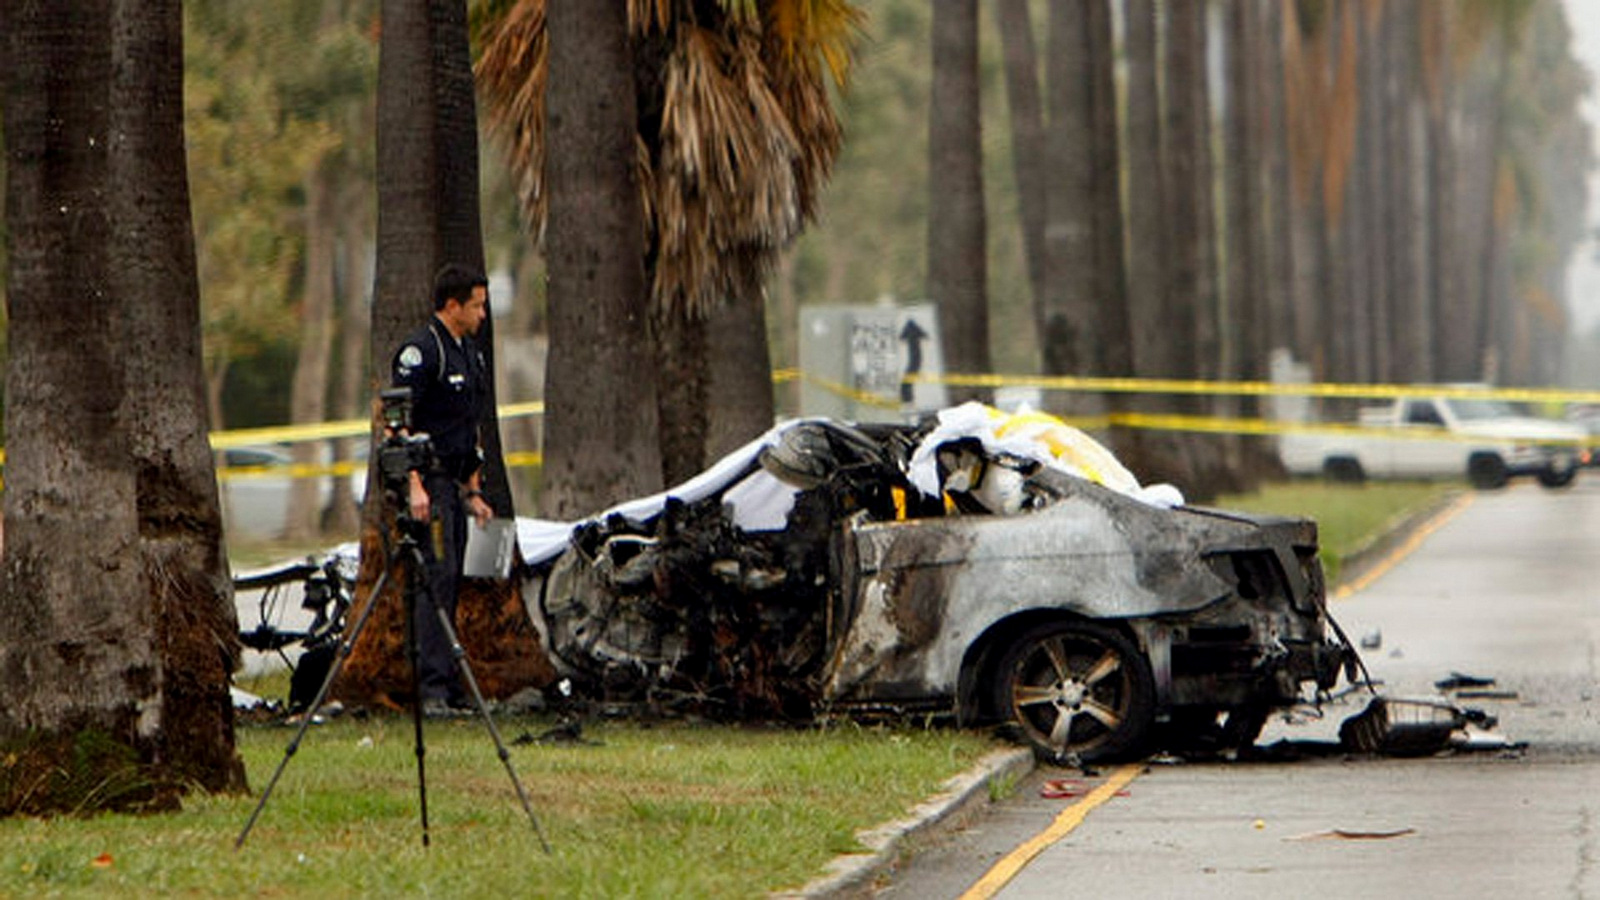 An LAPD officer investigates the scene of a single-vehicle accident in which journalist Michael Hastings was killed. (Photo: Al Seib/LA Times)